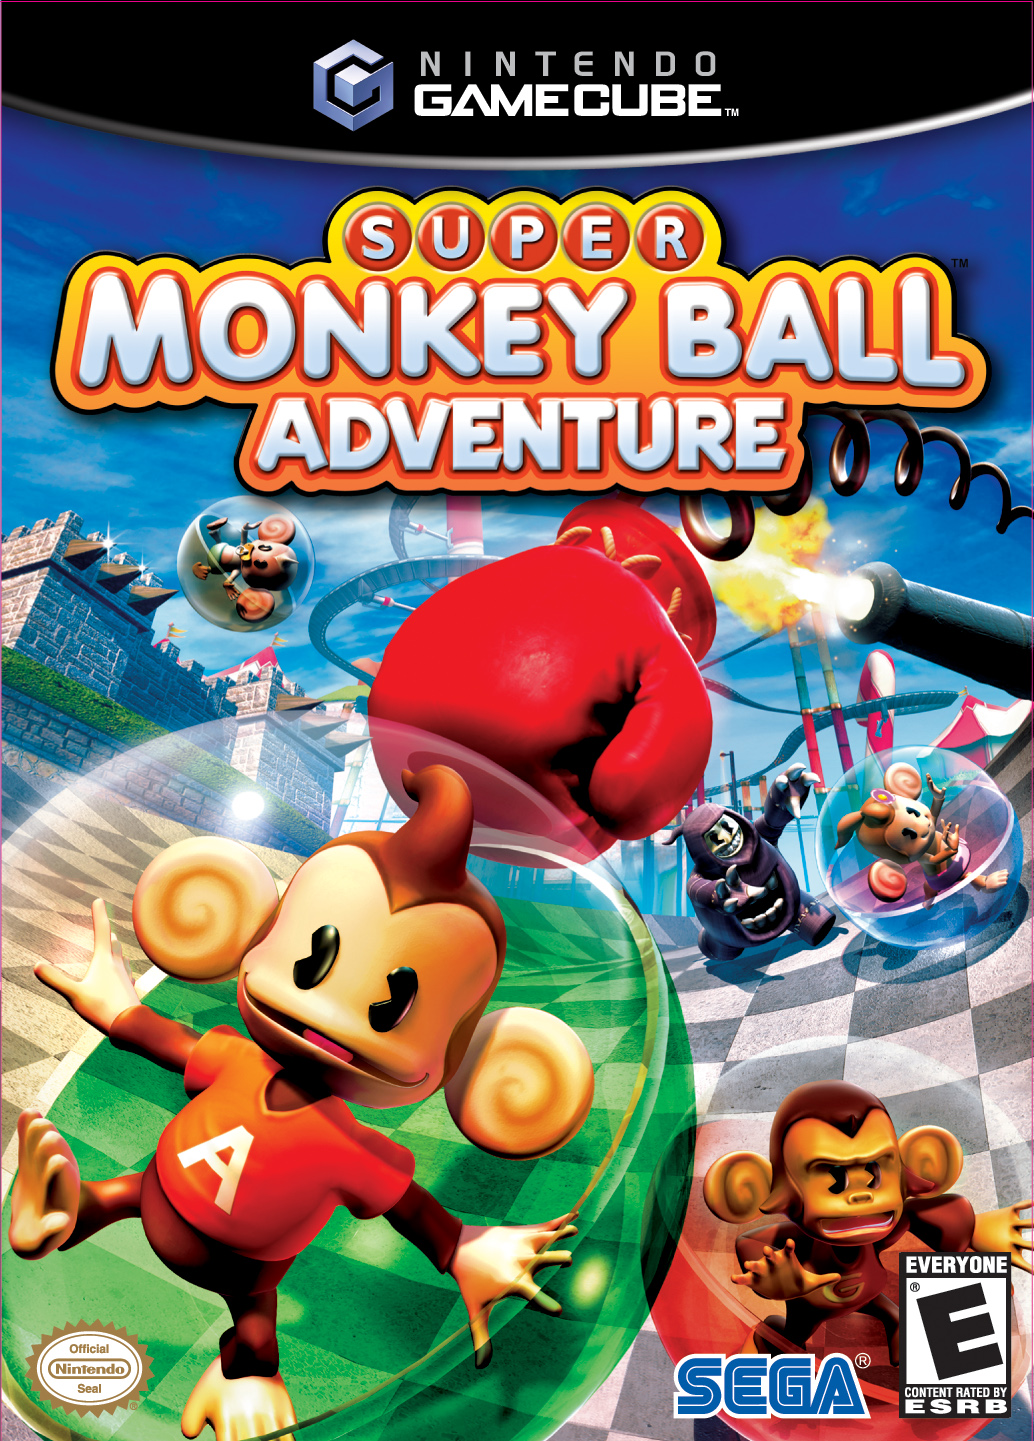 https://static.wikia.nocookie.net/supermonkeyball/images/5/54/SMBA_GameCubeBox-rated.jpg/revision/latest?cb=20130614145830